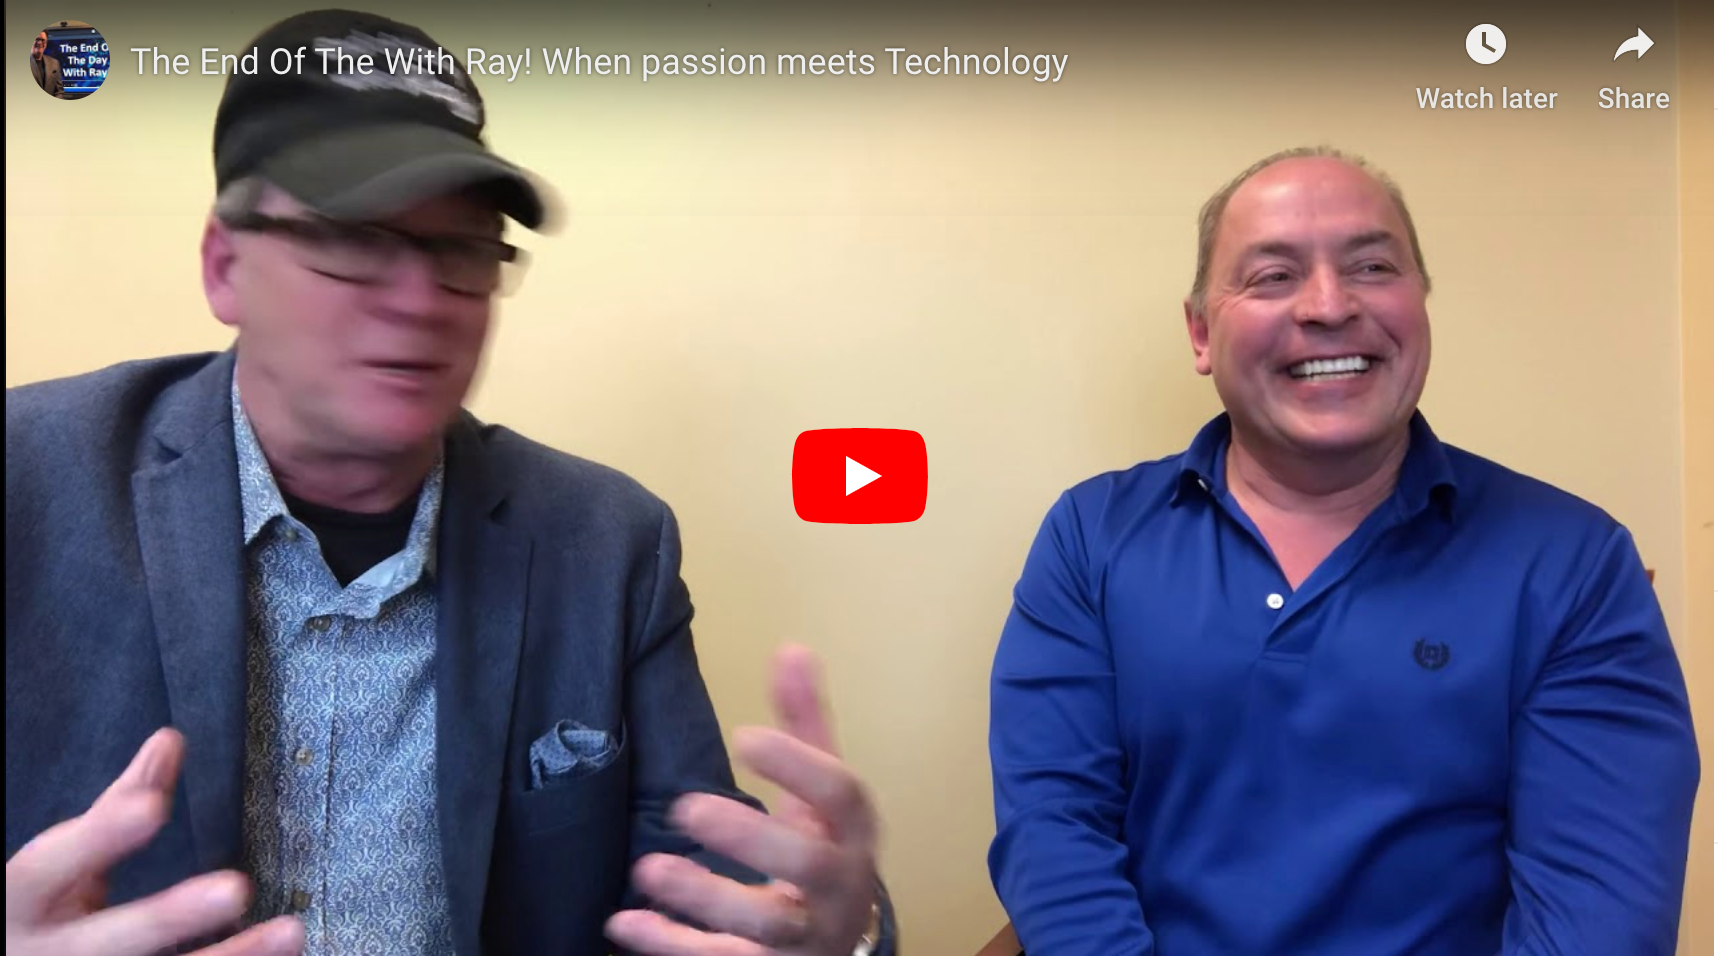 The End Of The With Ray! When passion meets Technology